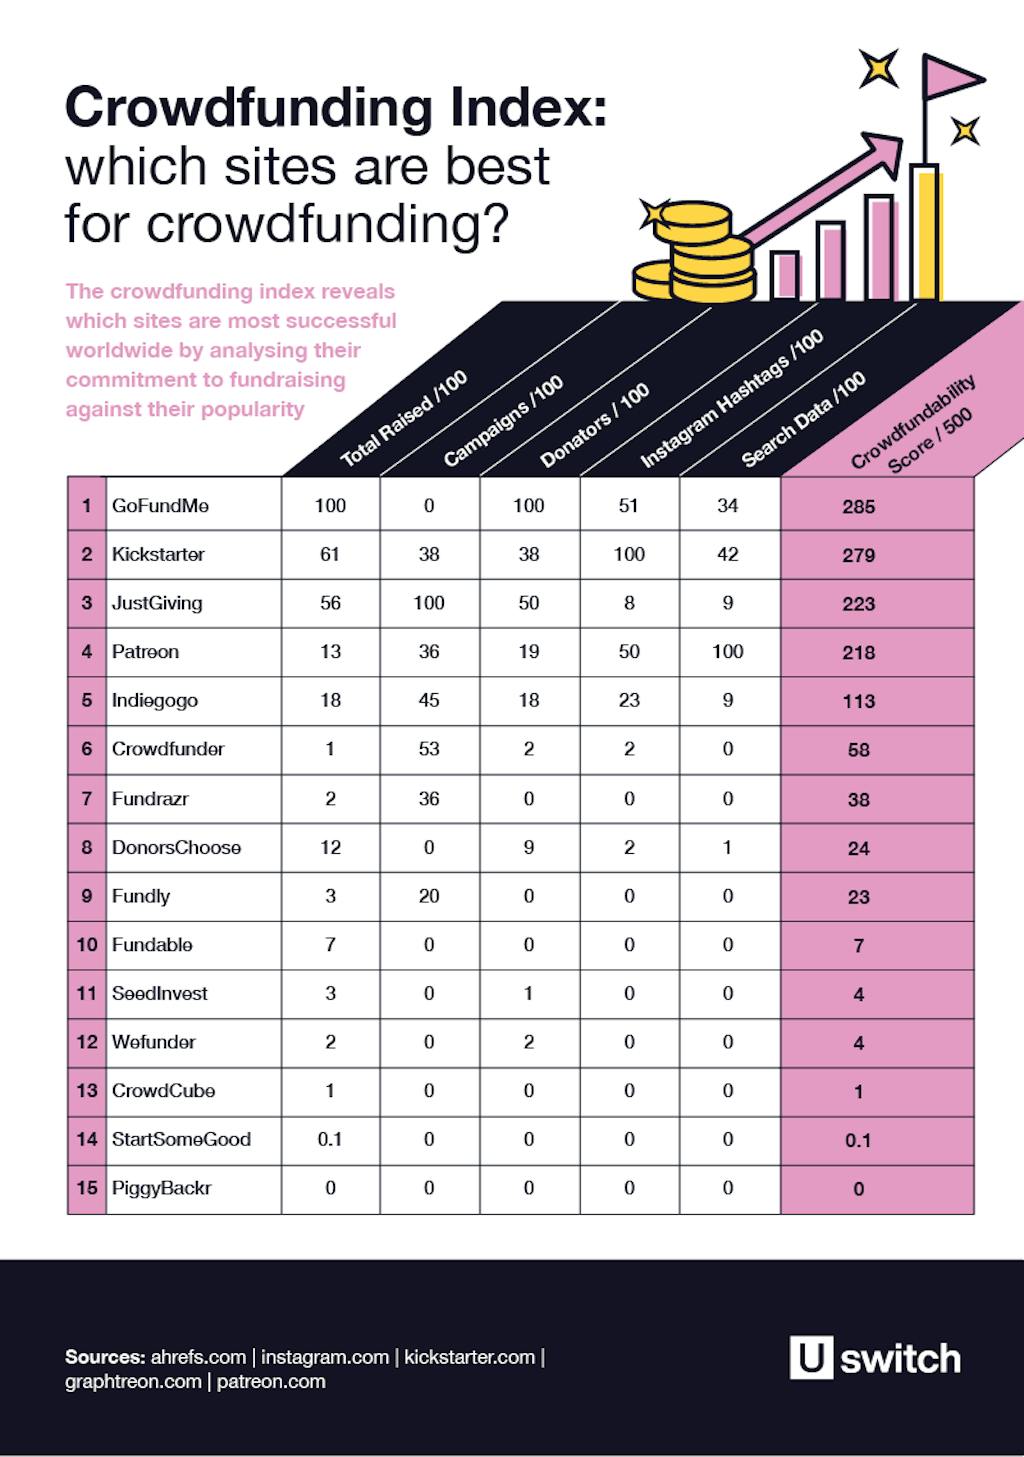 Crowdfunding Index: Which sites are the best for crowdfunding?